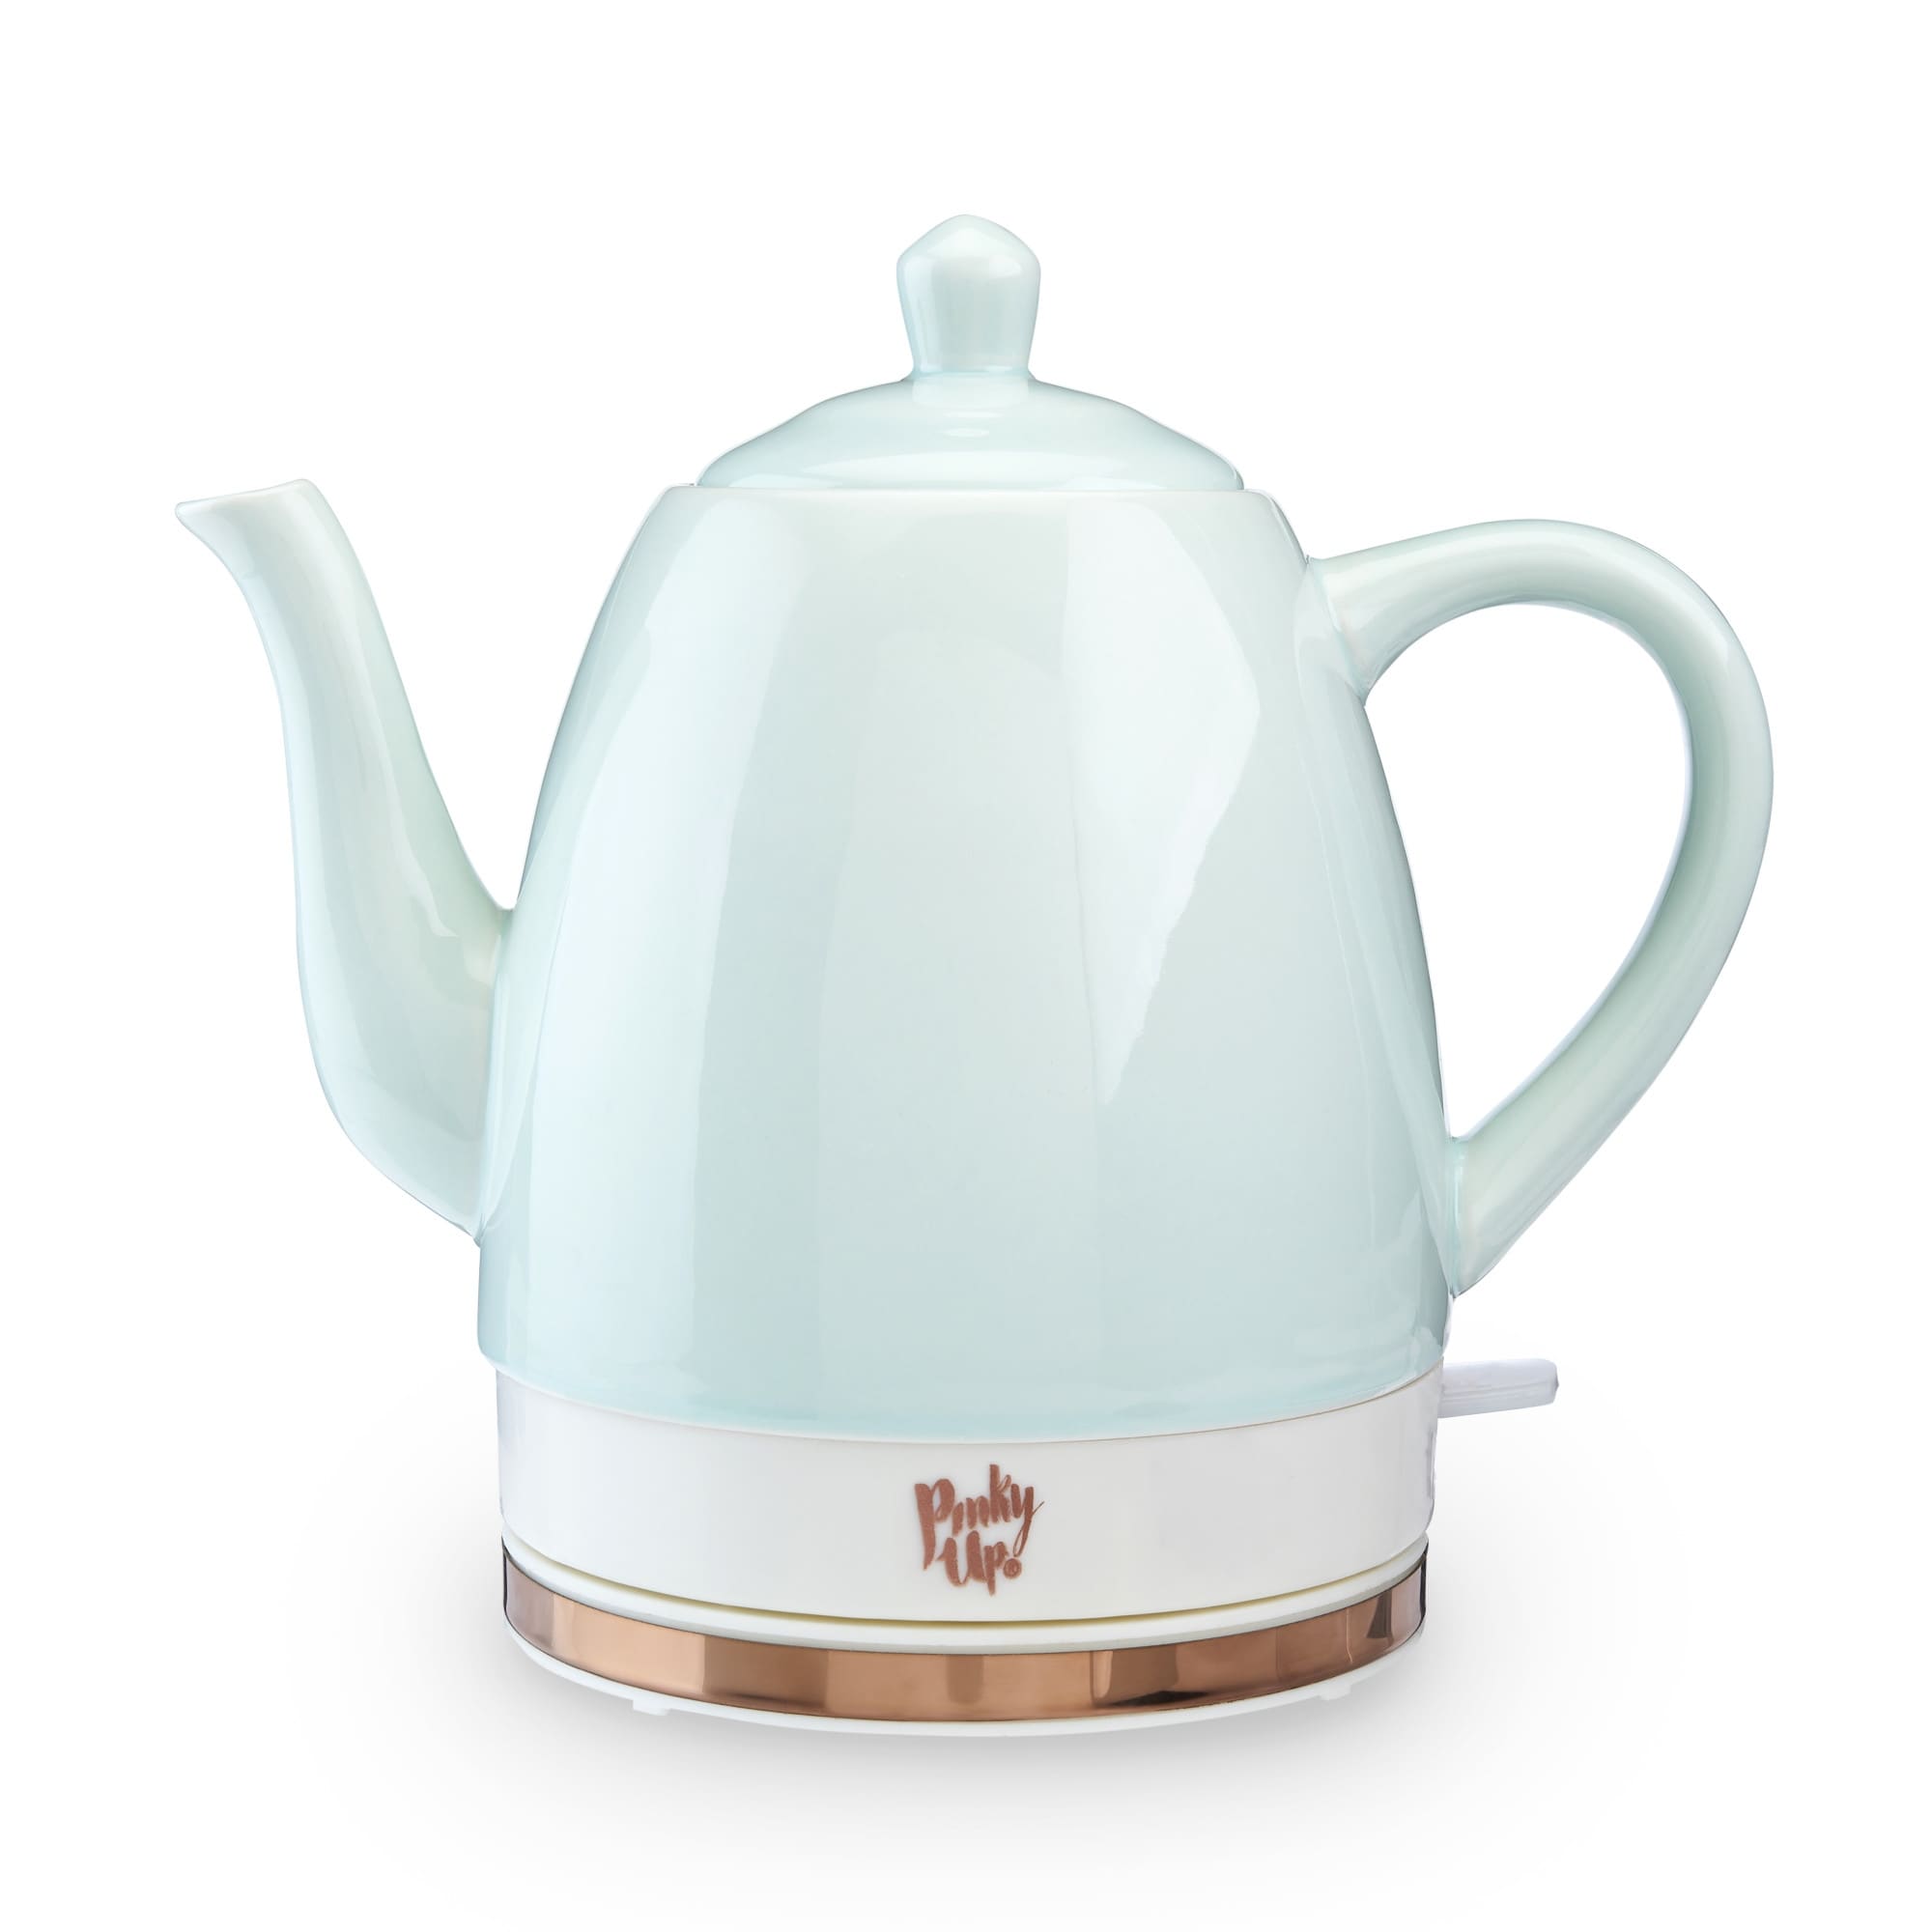 Noelle Ceramic Electric Tea Kettle by Pinky Up